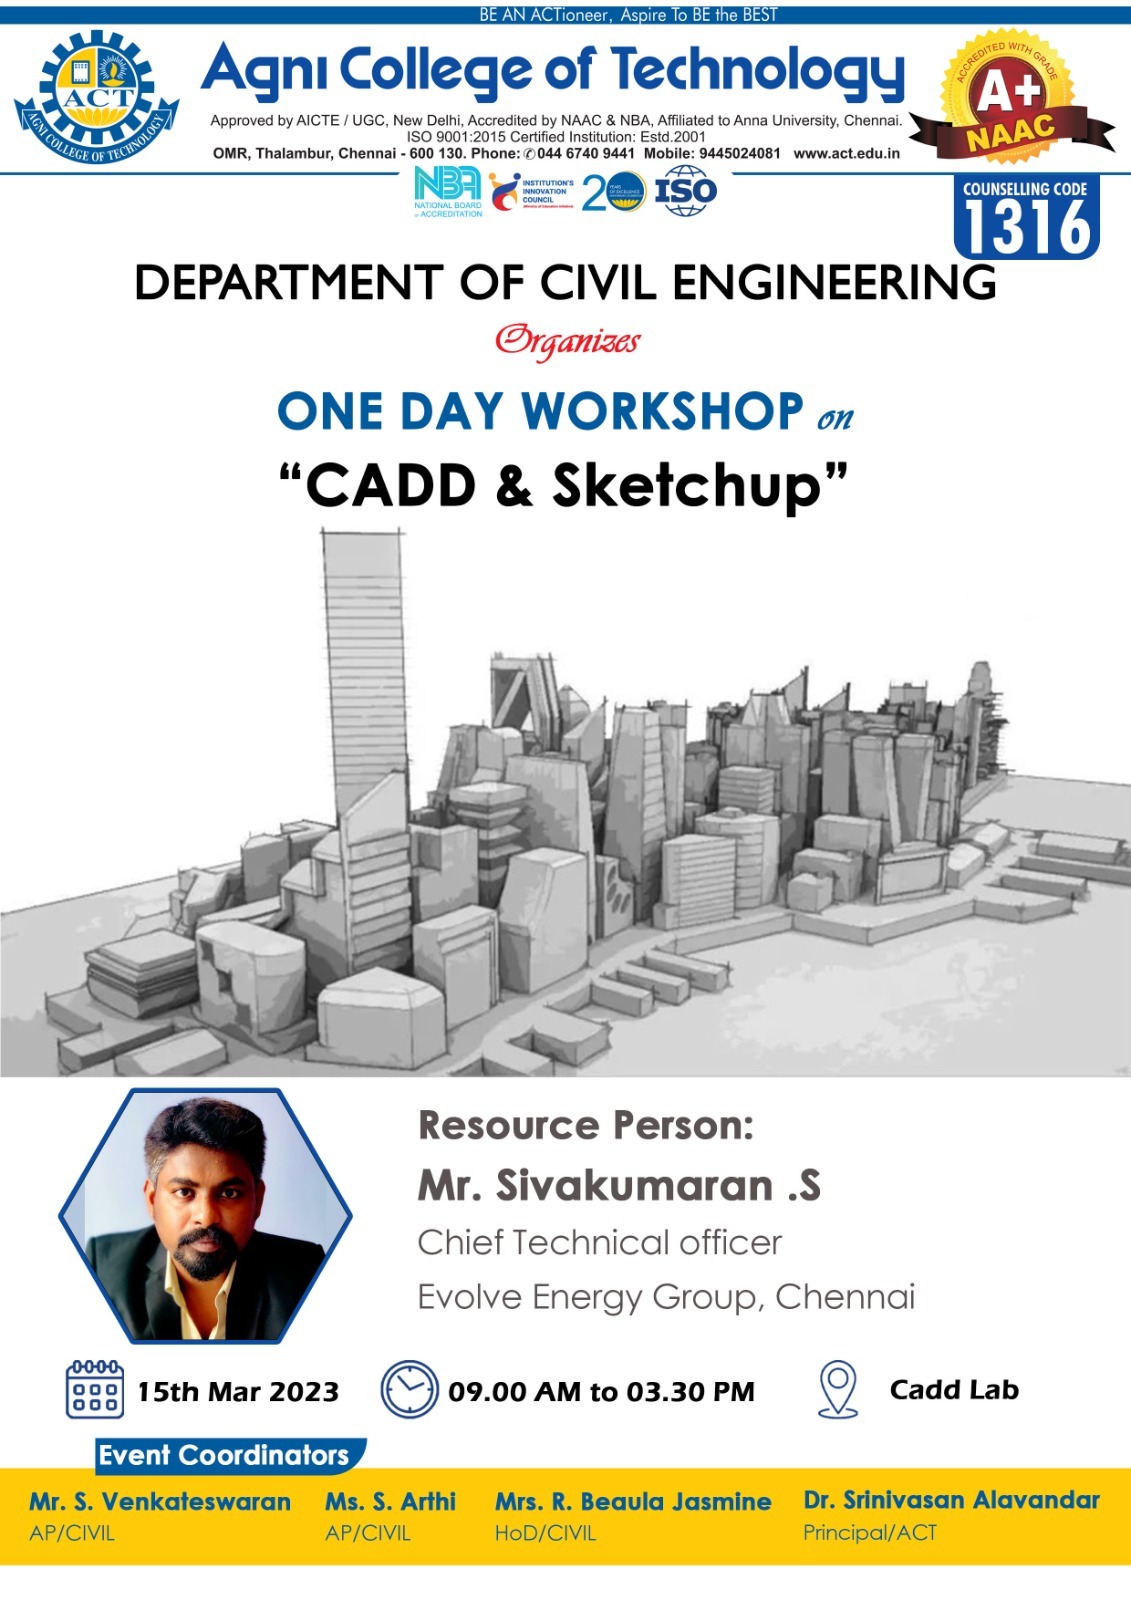 One day workshop on Cadd & Sketchup